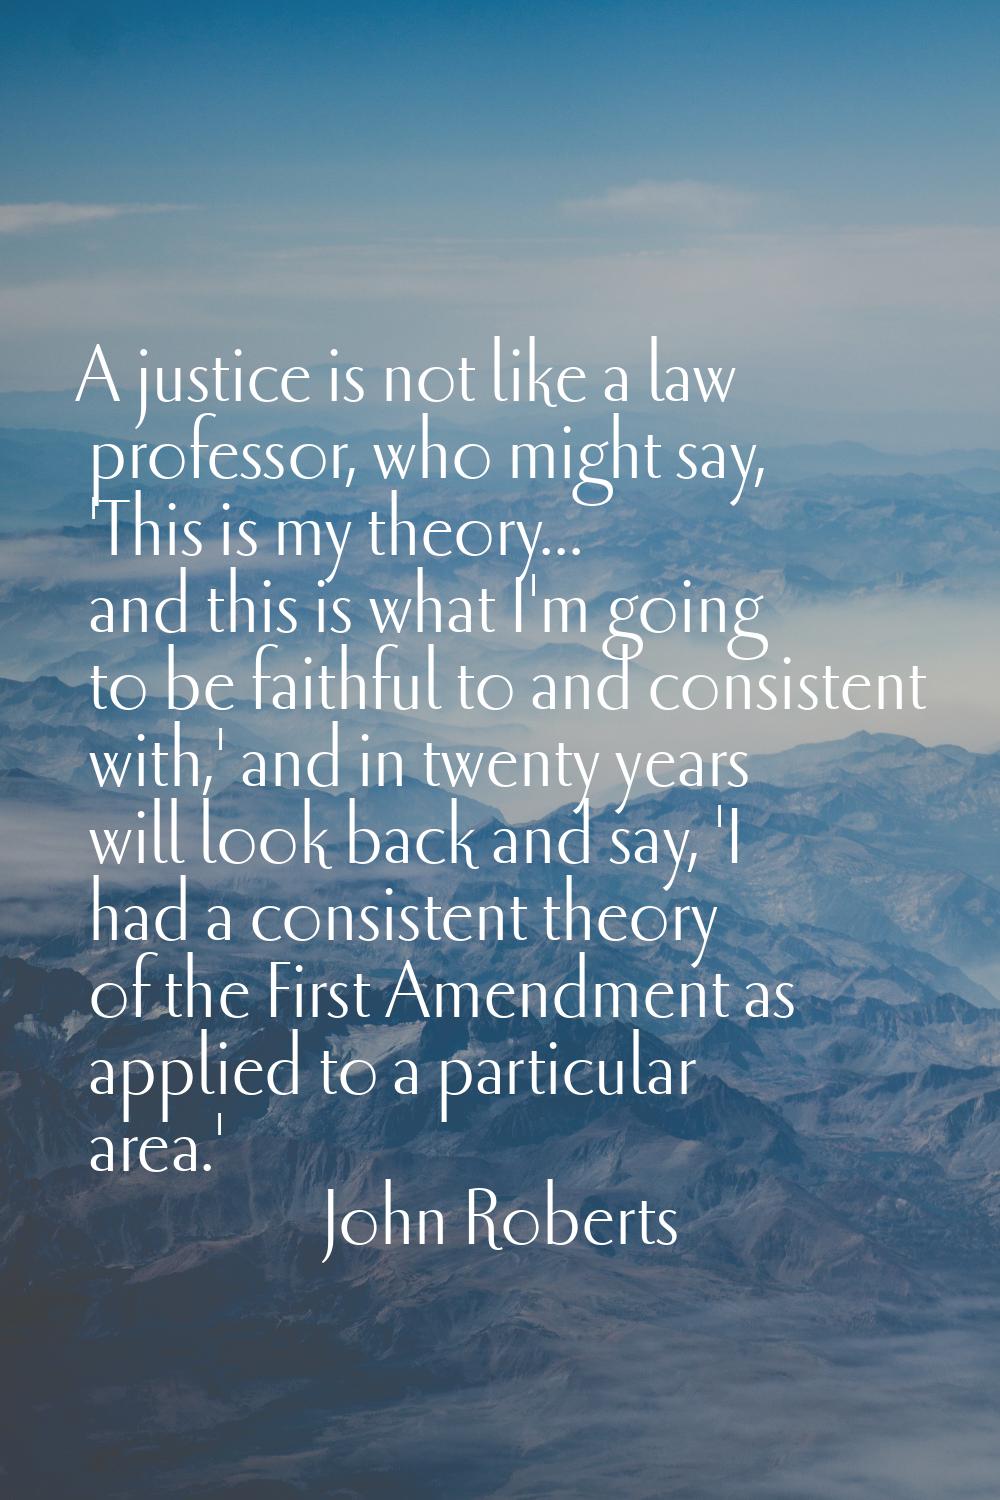 A justice is not like a law professor, who might say, 'This is my theory... and this is what I'm go